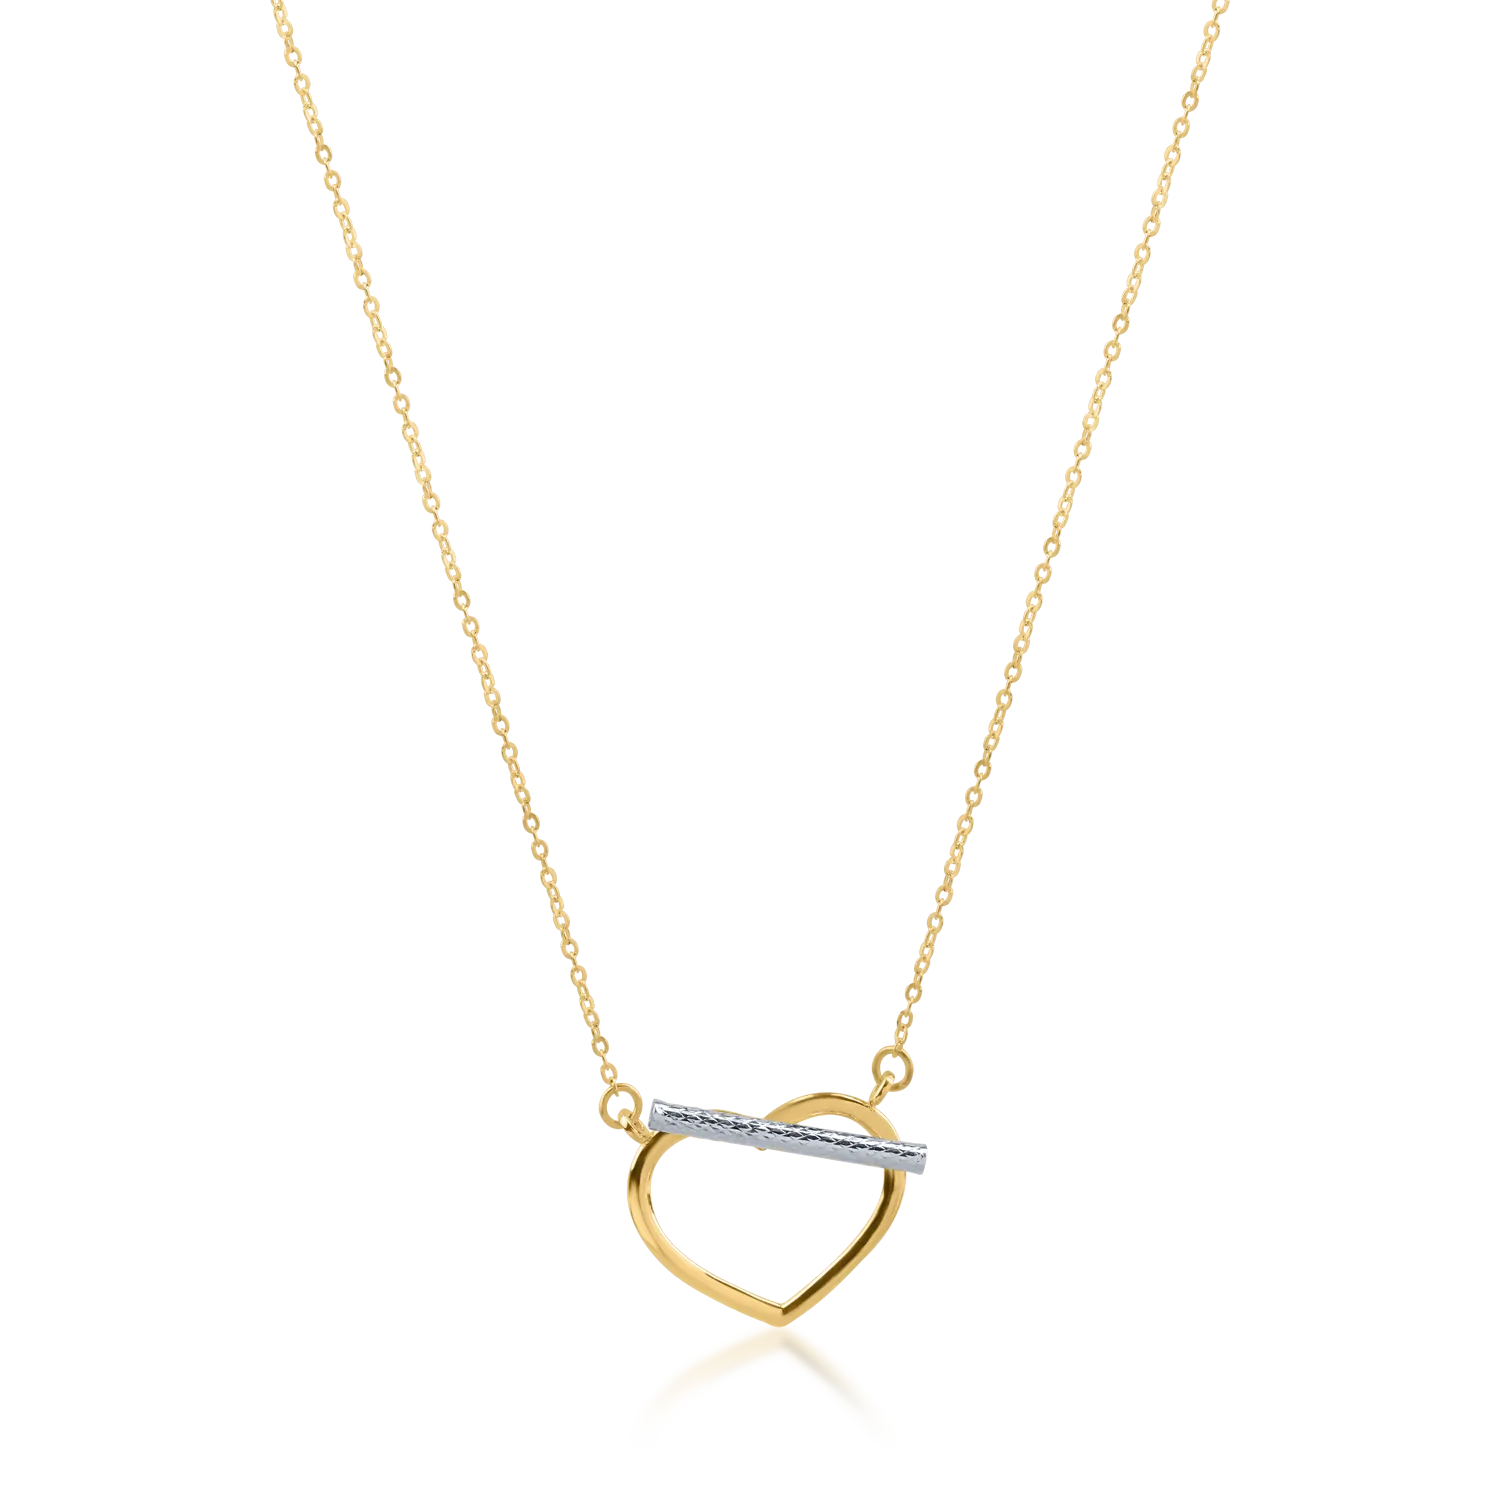 Yellow gold heart pendant chain and white gold detail